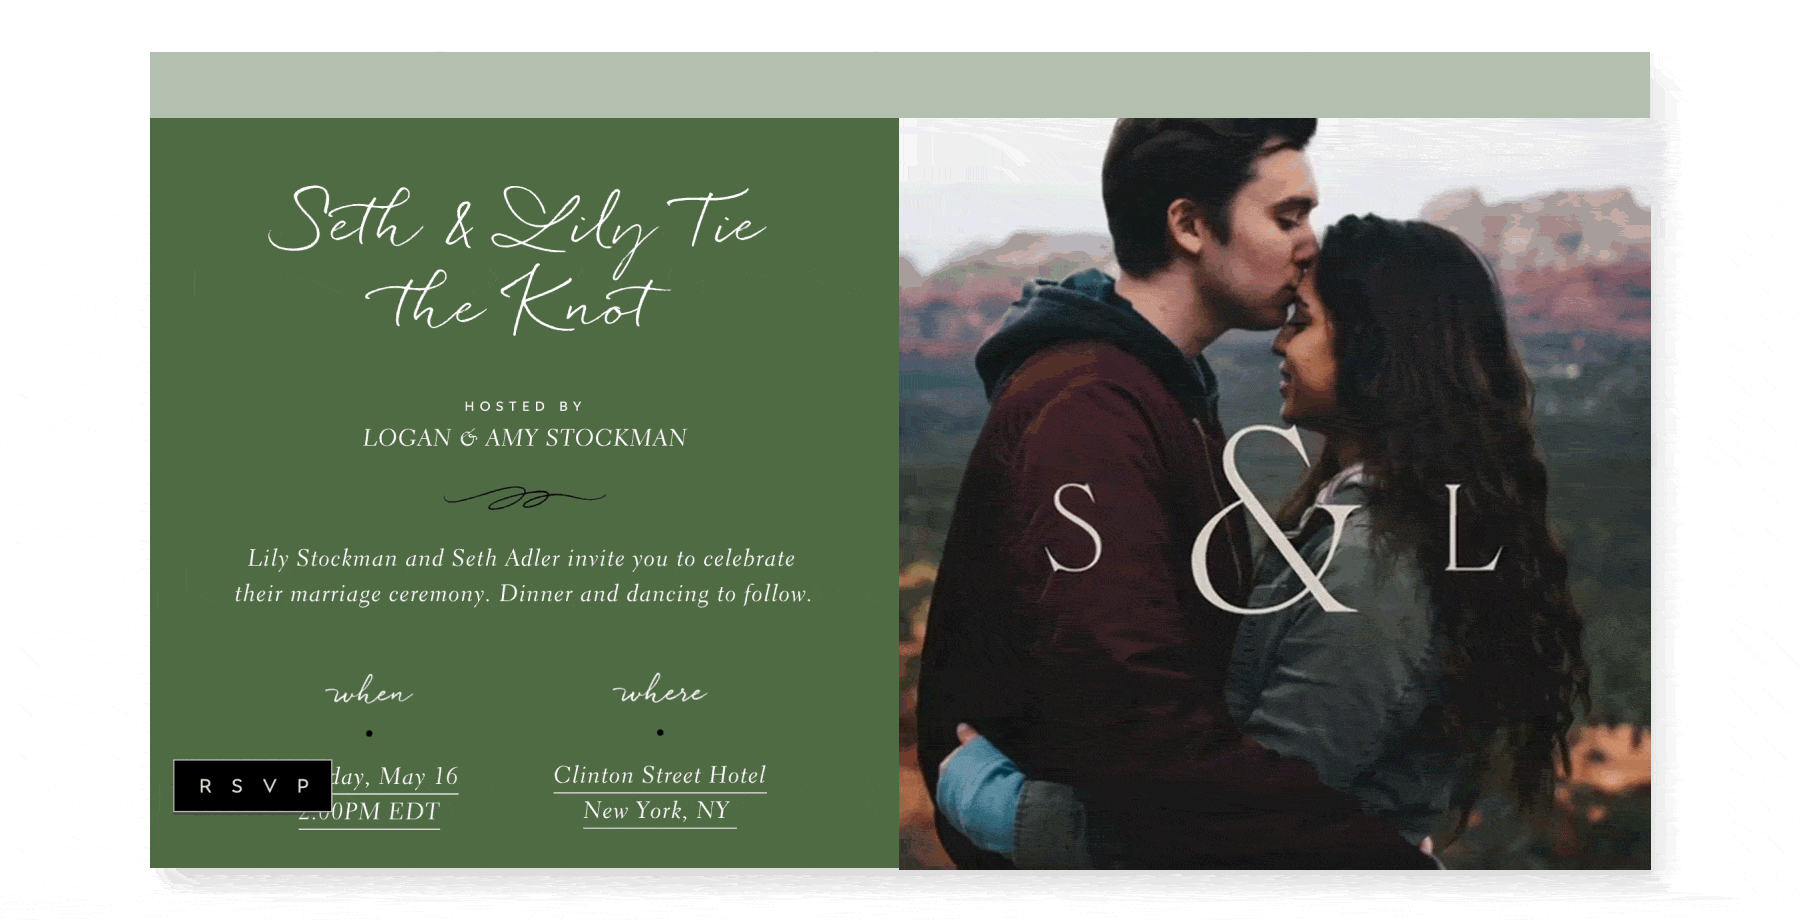 An online invite is green on the left with the words “Seth & Lily Tie the Knot” in white script, and on the right has a photo of a man and woman embracing in the Southwest with the letters “S & L” fading in and out.